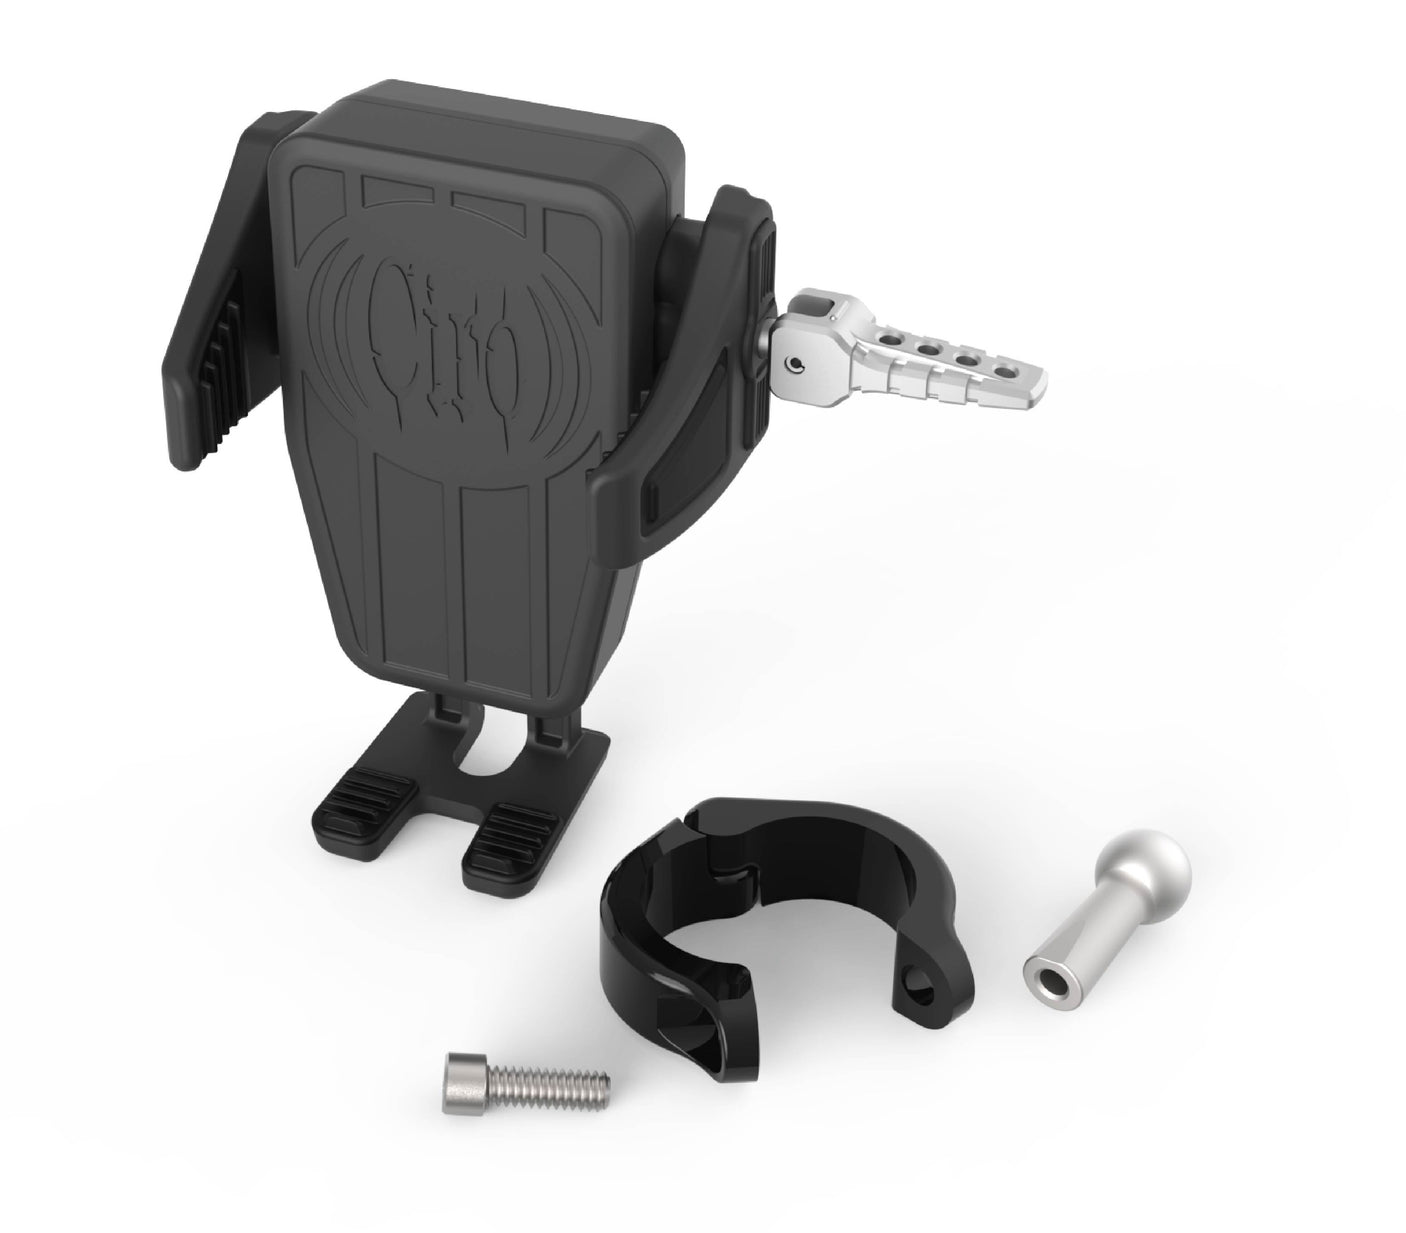 Trim Line Cybercharger Phone Holder with bar clamp mount